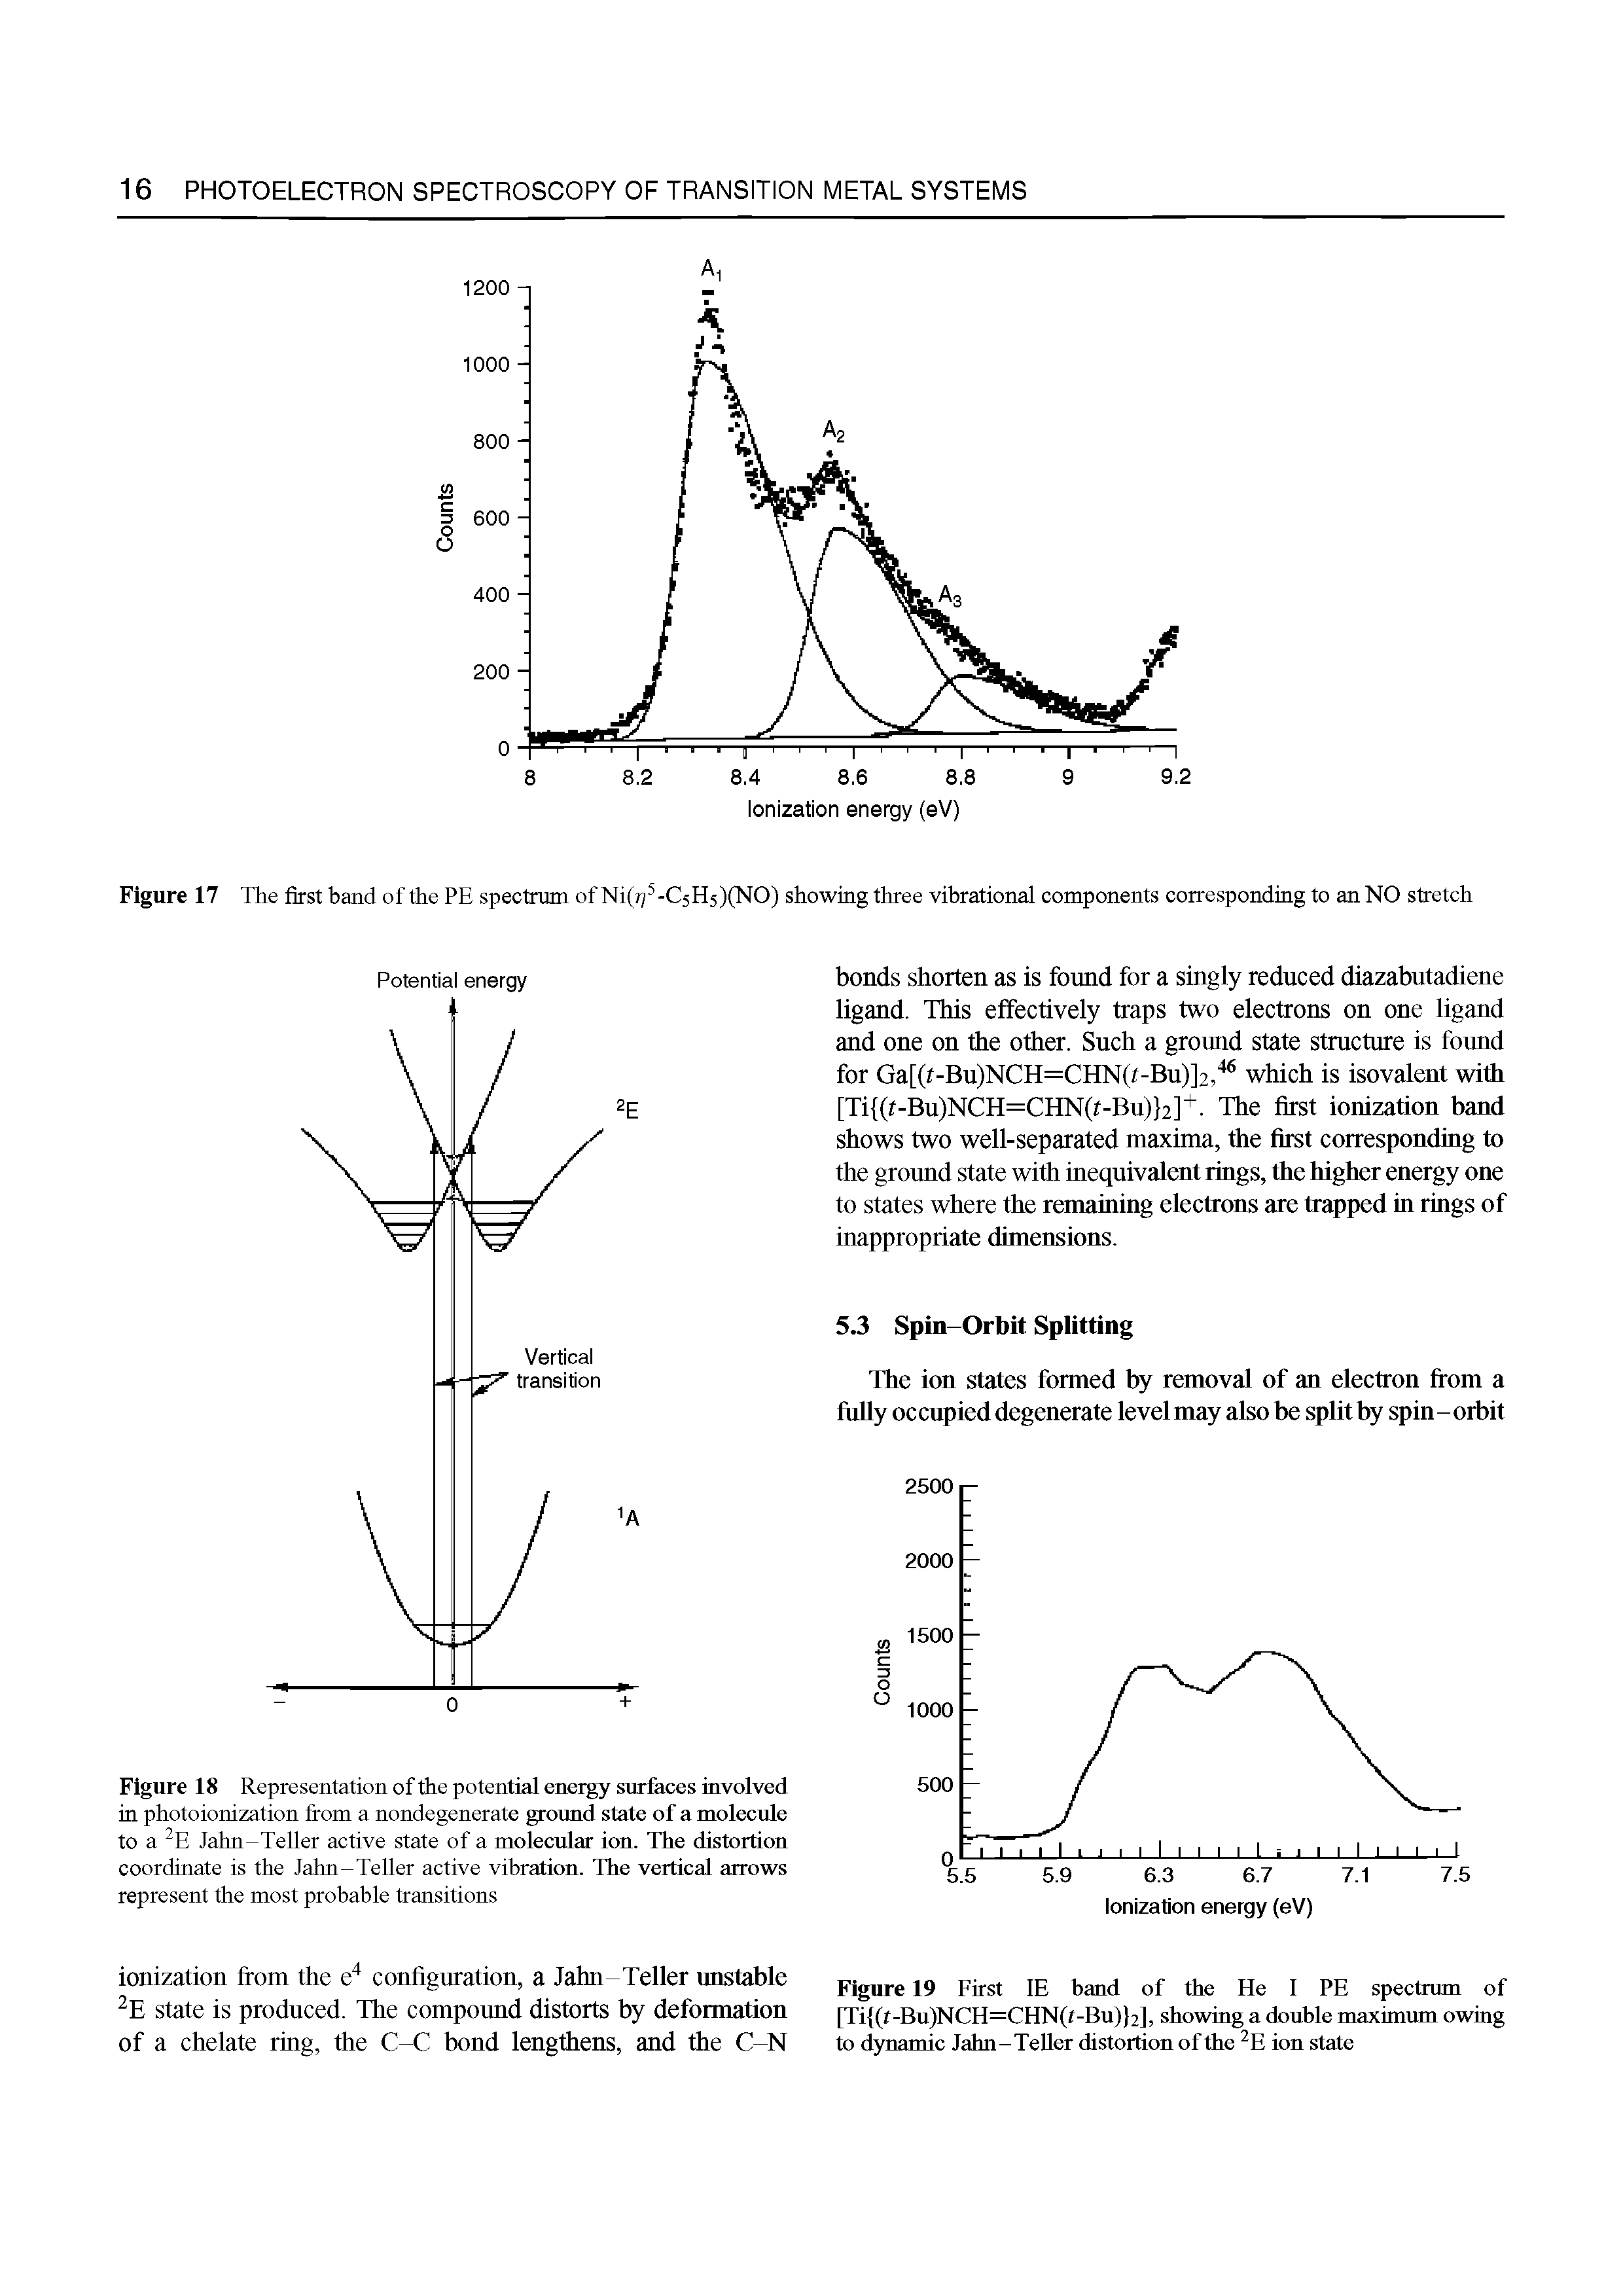 Figure 18 Representation of the potential energy surfaces involved in photoionization from a nondegenerate ground state of a molecule to a Jahn-Teller active state of a molecular ion. The distortion coordinate is the Jahn-Teller active vibration. The vertical arrows represent the most probable transitions...